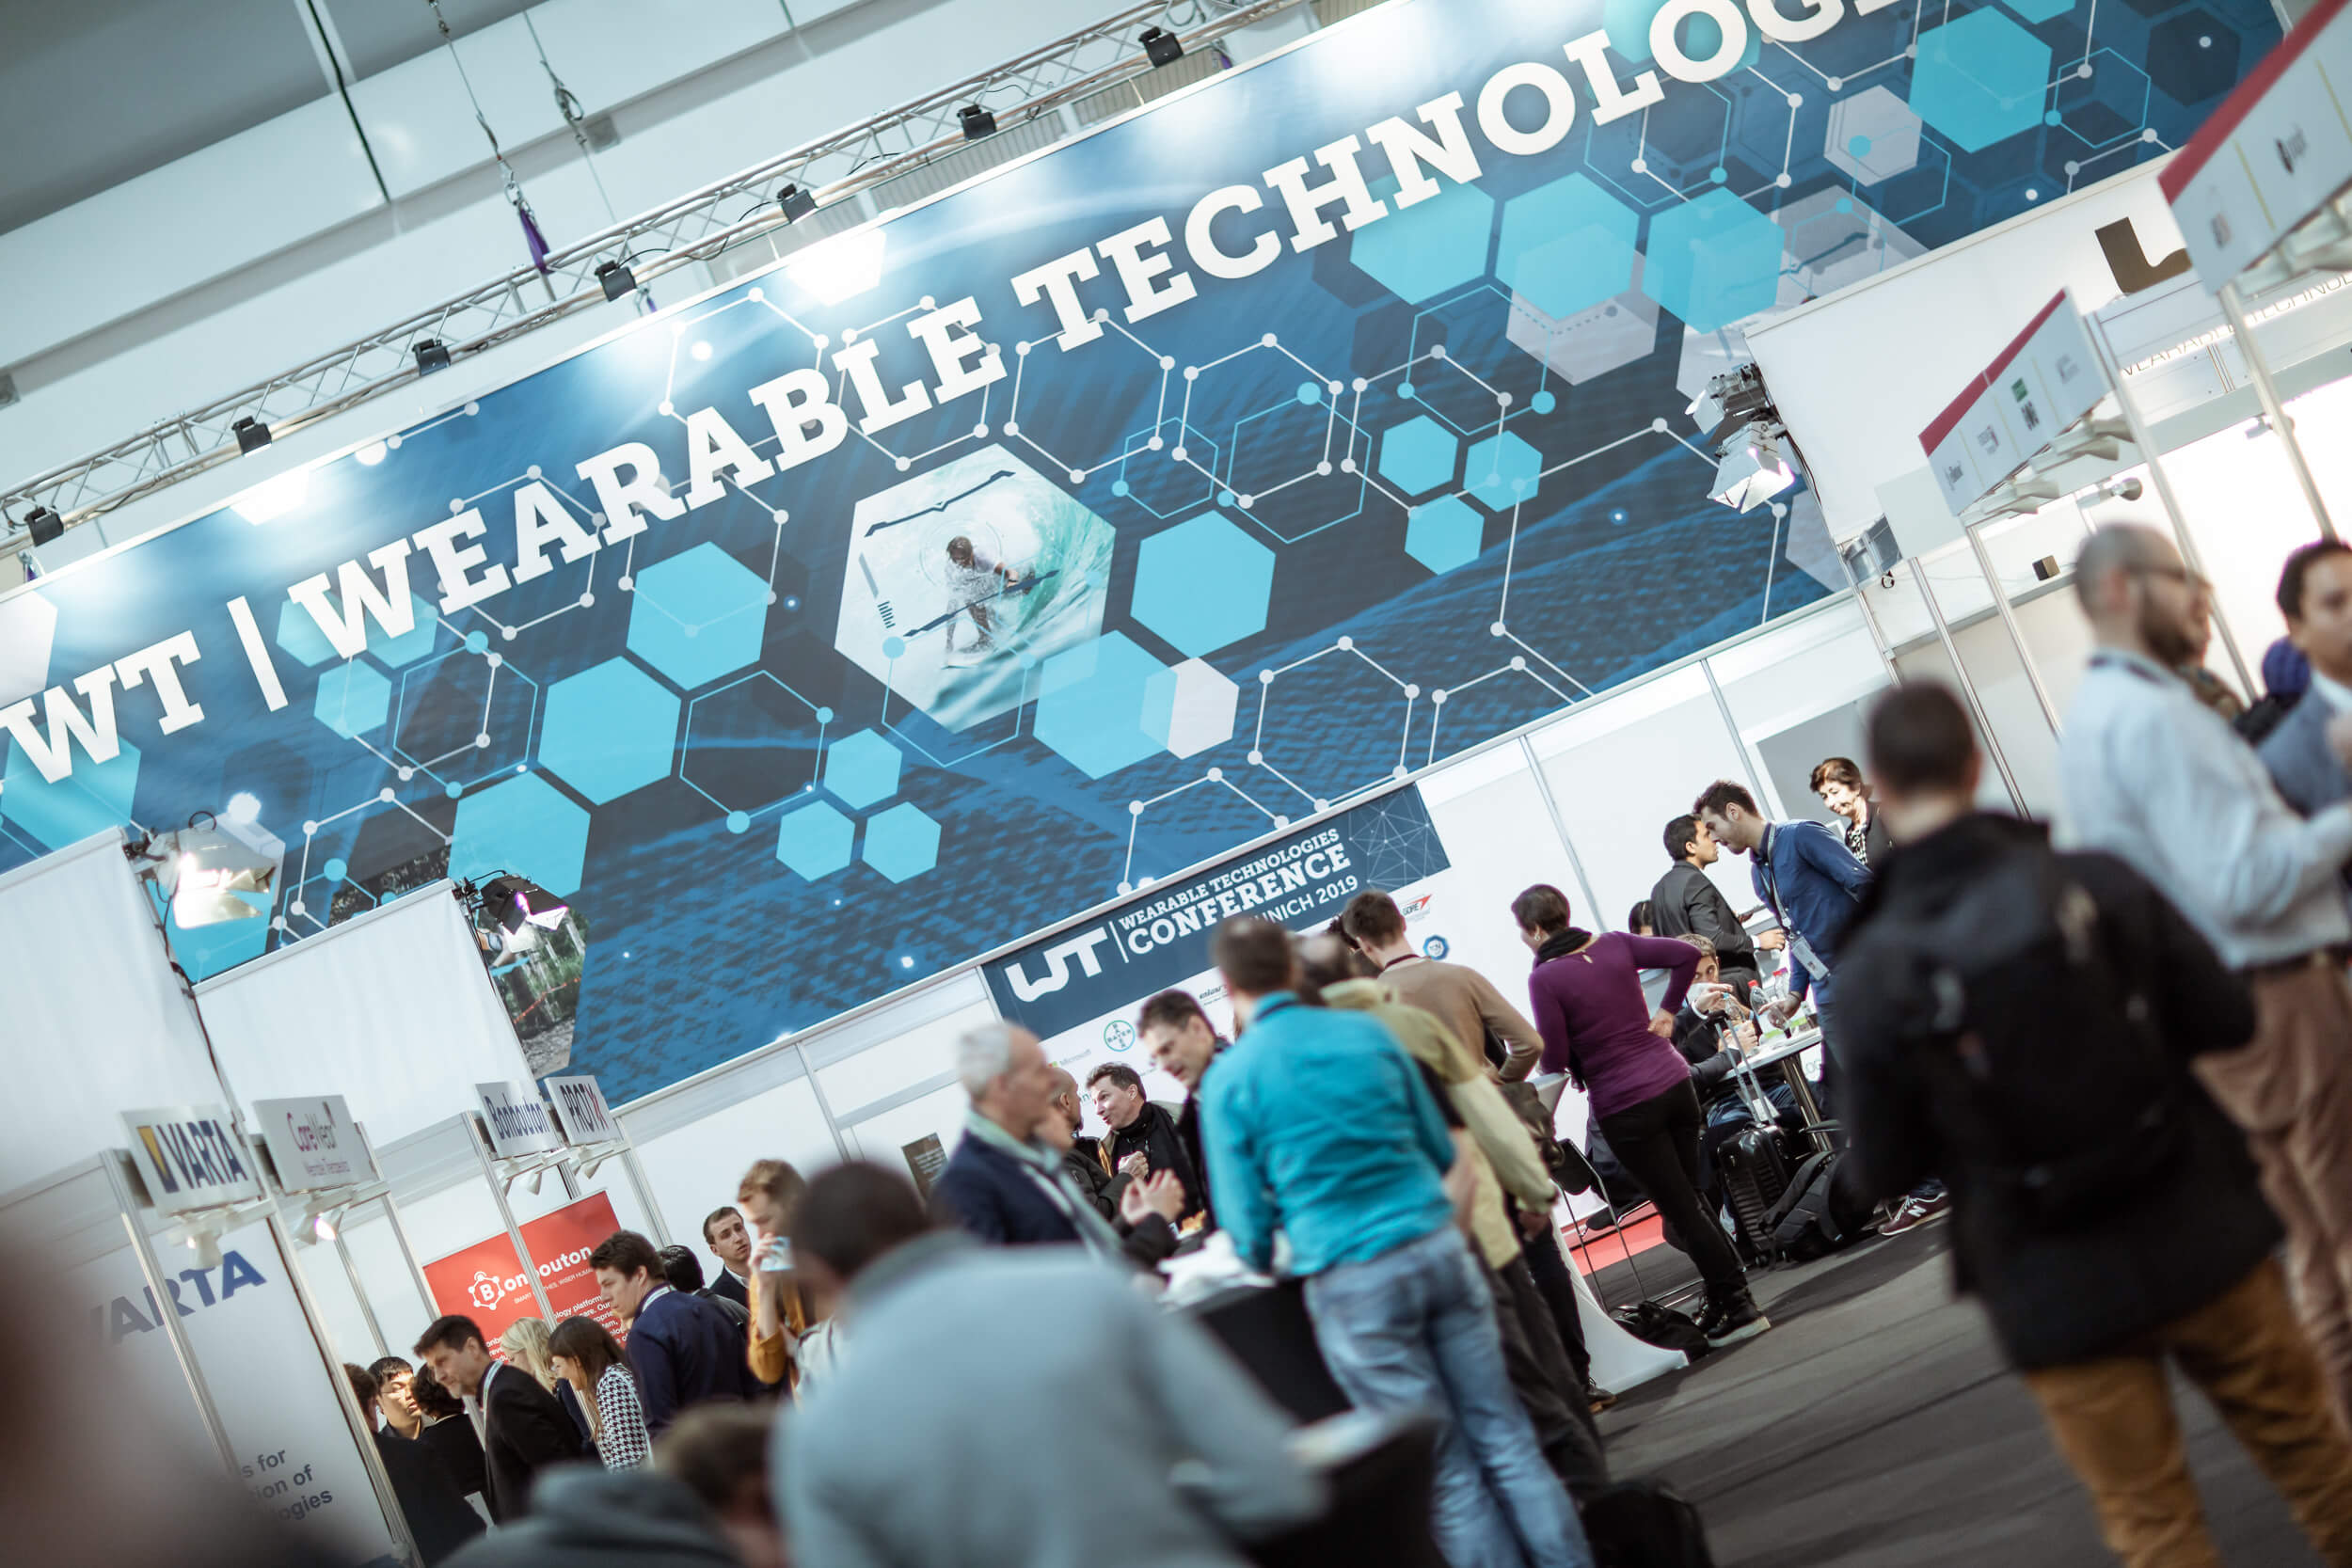 WT | Wearable Technologies Conference focuses on connected future